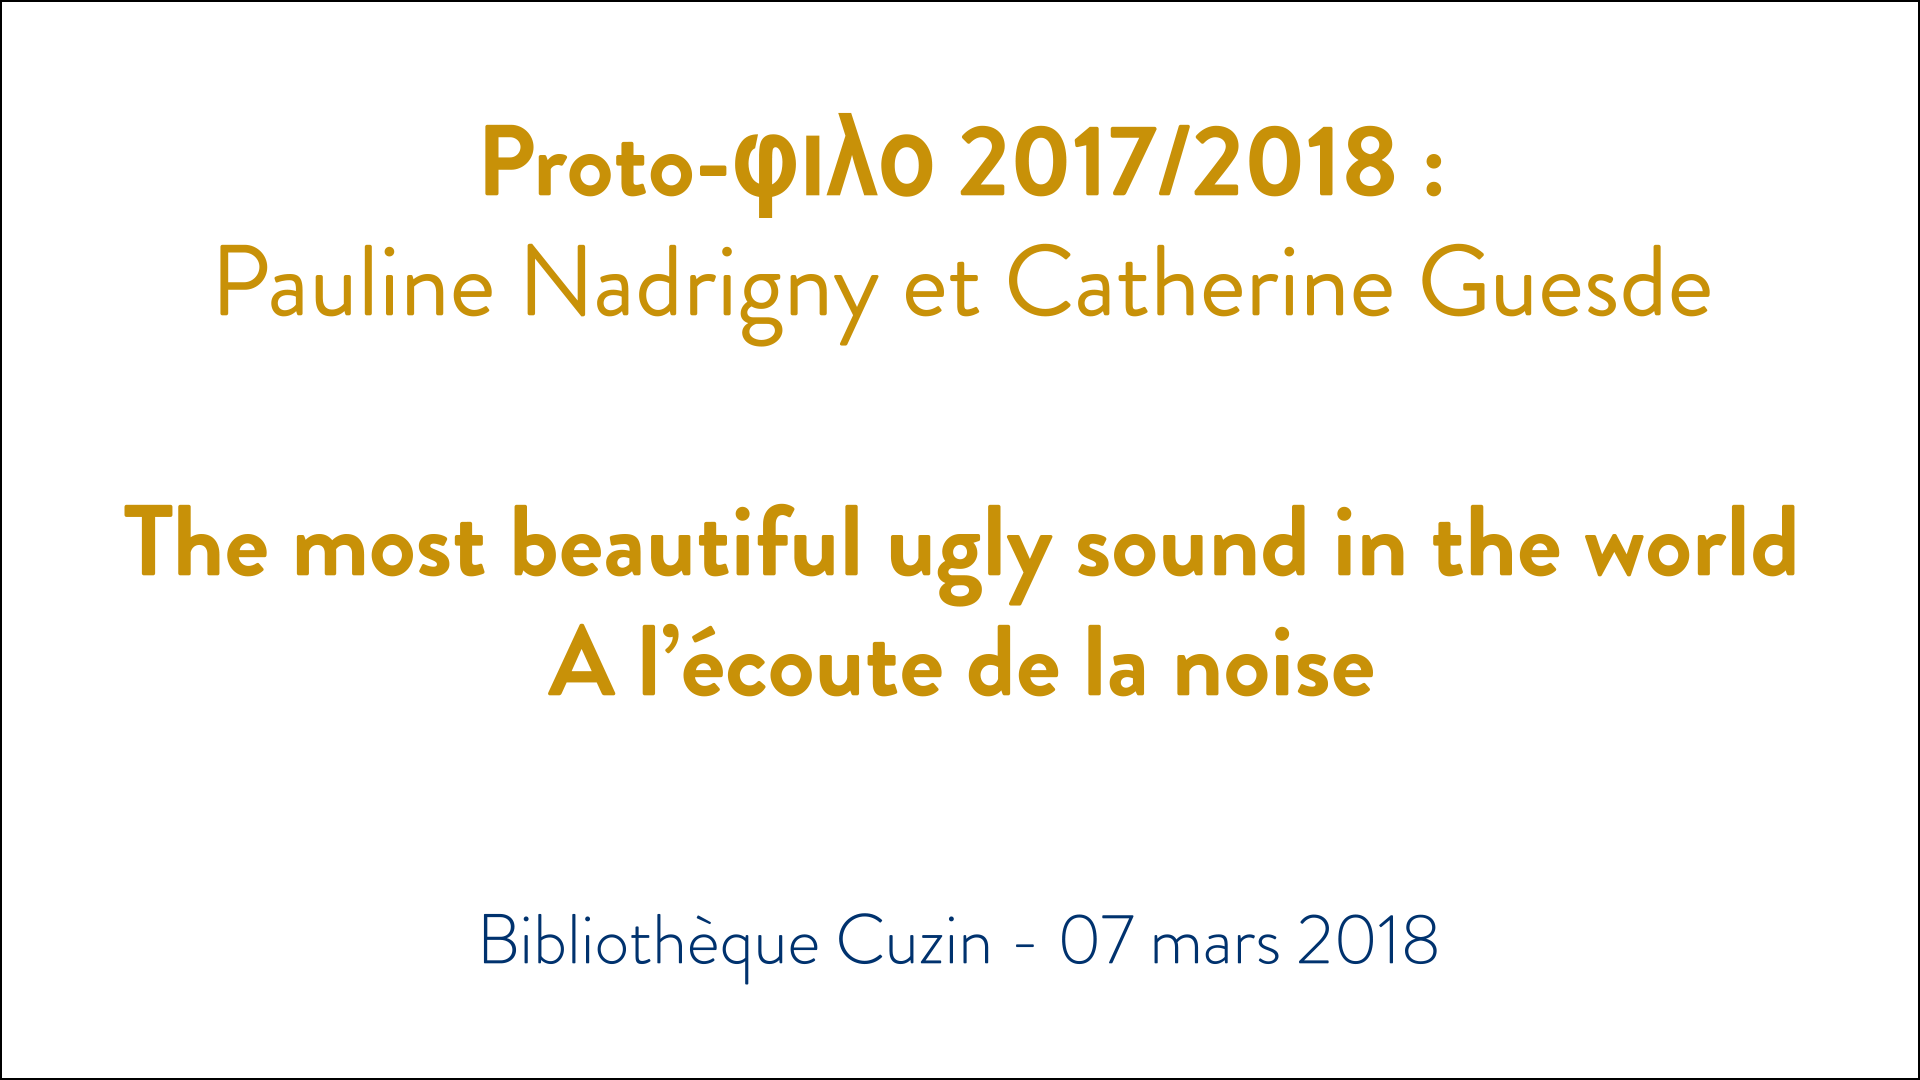 The most beautiful ugly sound in the world - Pauline Nadrigny et Catherine Guesde